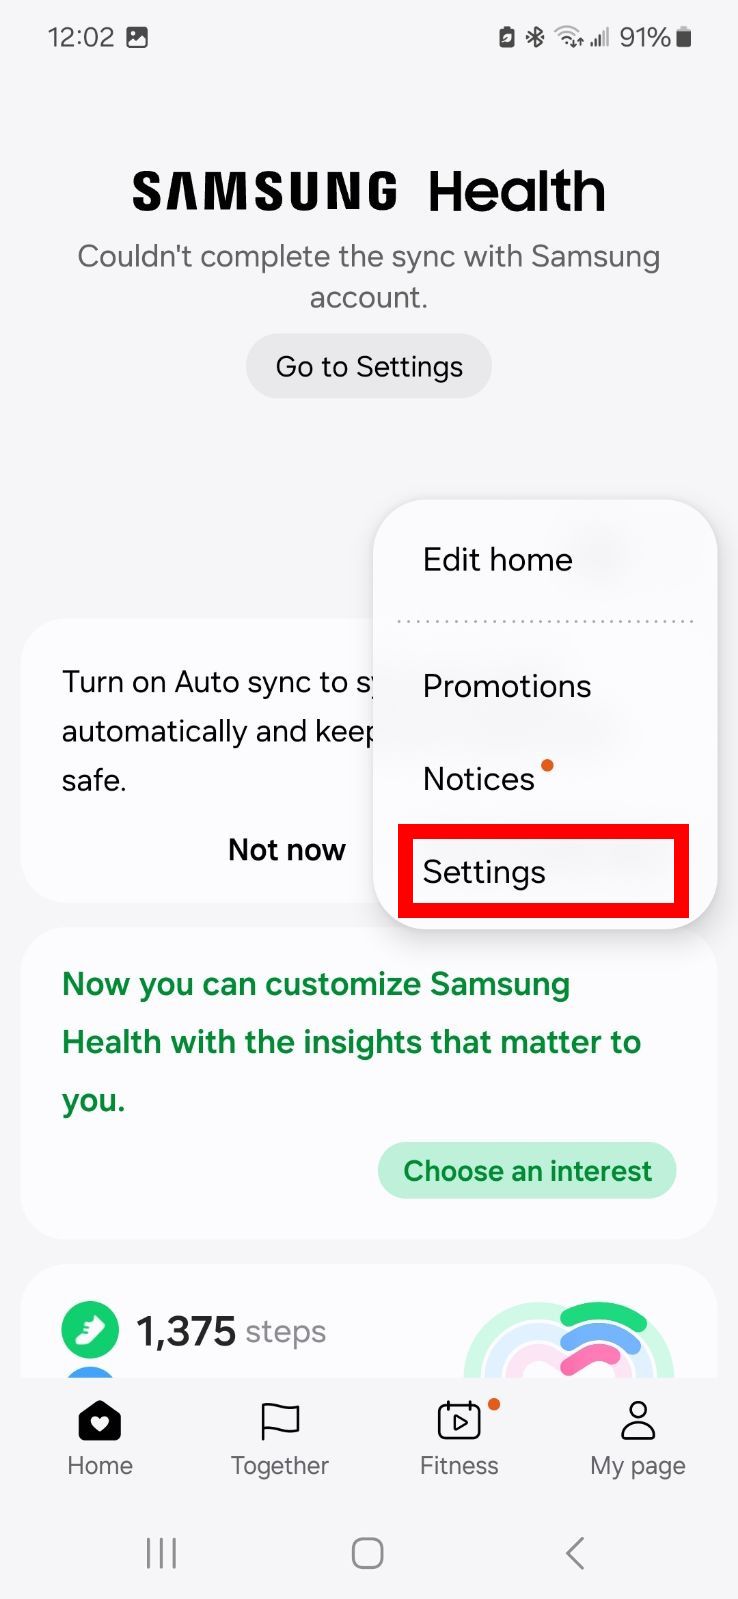 Red rectangle outline highlighting Settings in Samsung Health app on Samsung phone